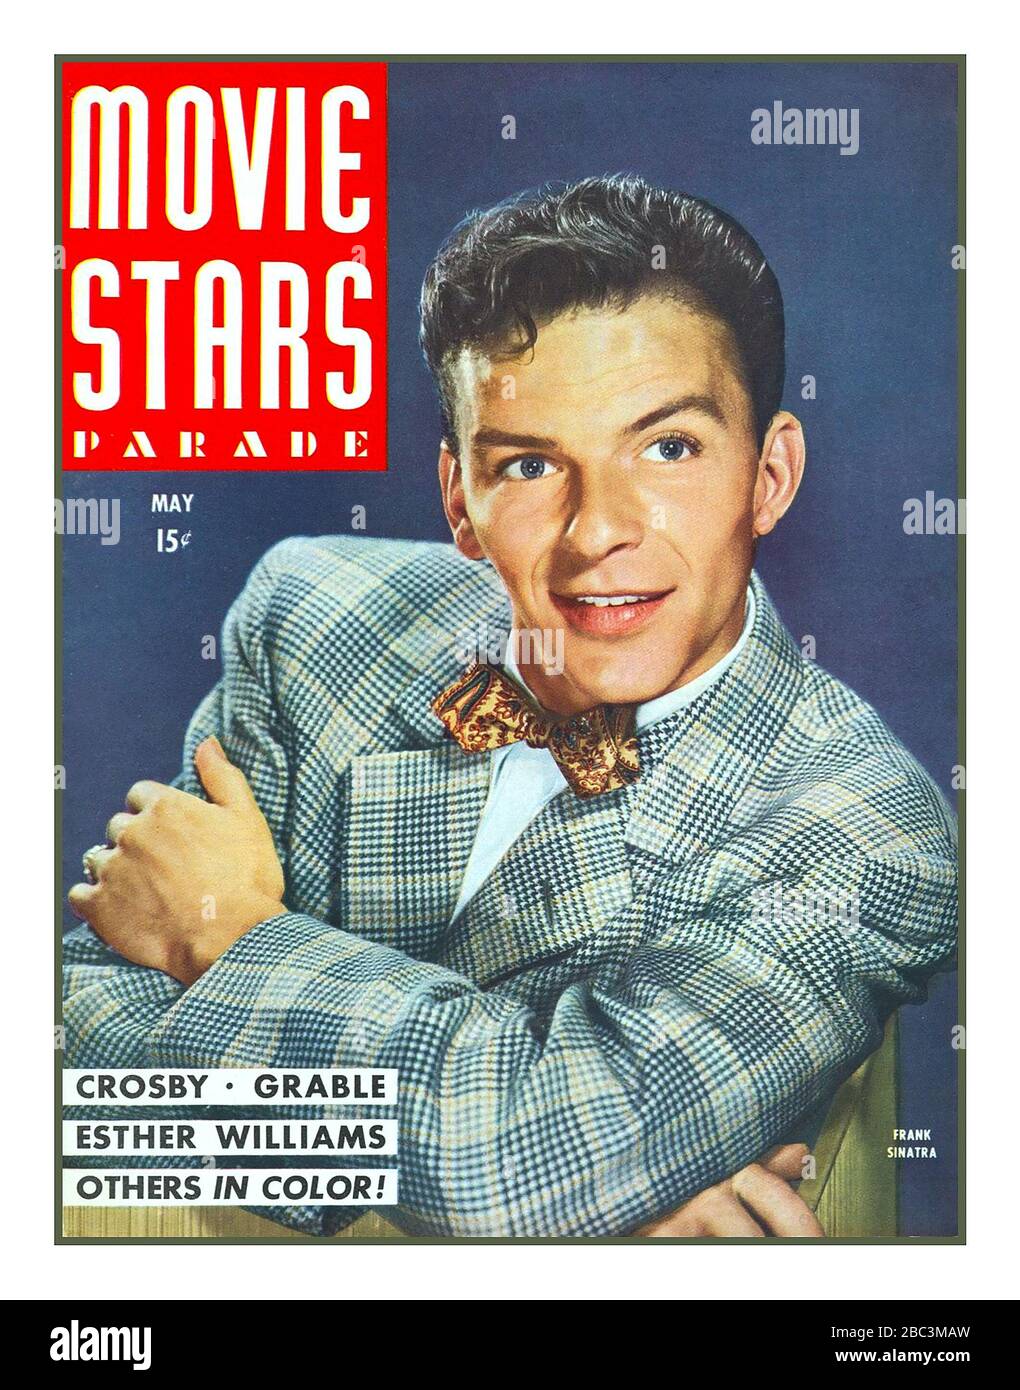 FRANK SINATRA 1940s VINTAGE Movie Stars Parade magazine May 1945. The cover features Frank Sinatra, who starred in Anchors Aweigh, a film released two months after this issue in July 1945. The cover also references Bing Crosby, Betty Grable, and Esther Williams. Hollywood USA Singer American film actor, filmmaker, producer, showman, singer. Eleven times became a Grammy Award winner. He was famous for the romantic style of performing songs & the 'velvet' timbre of his voice. In the 20th century, Sinatra became a legend not only in the musical world, but also in every aspect of American culture Stock Photo